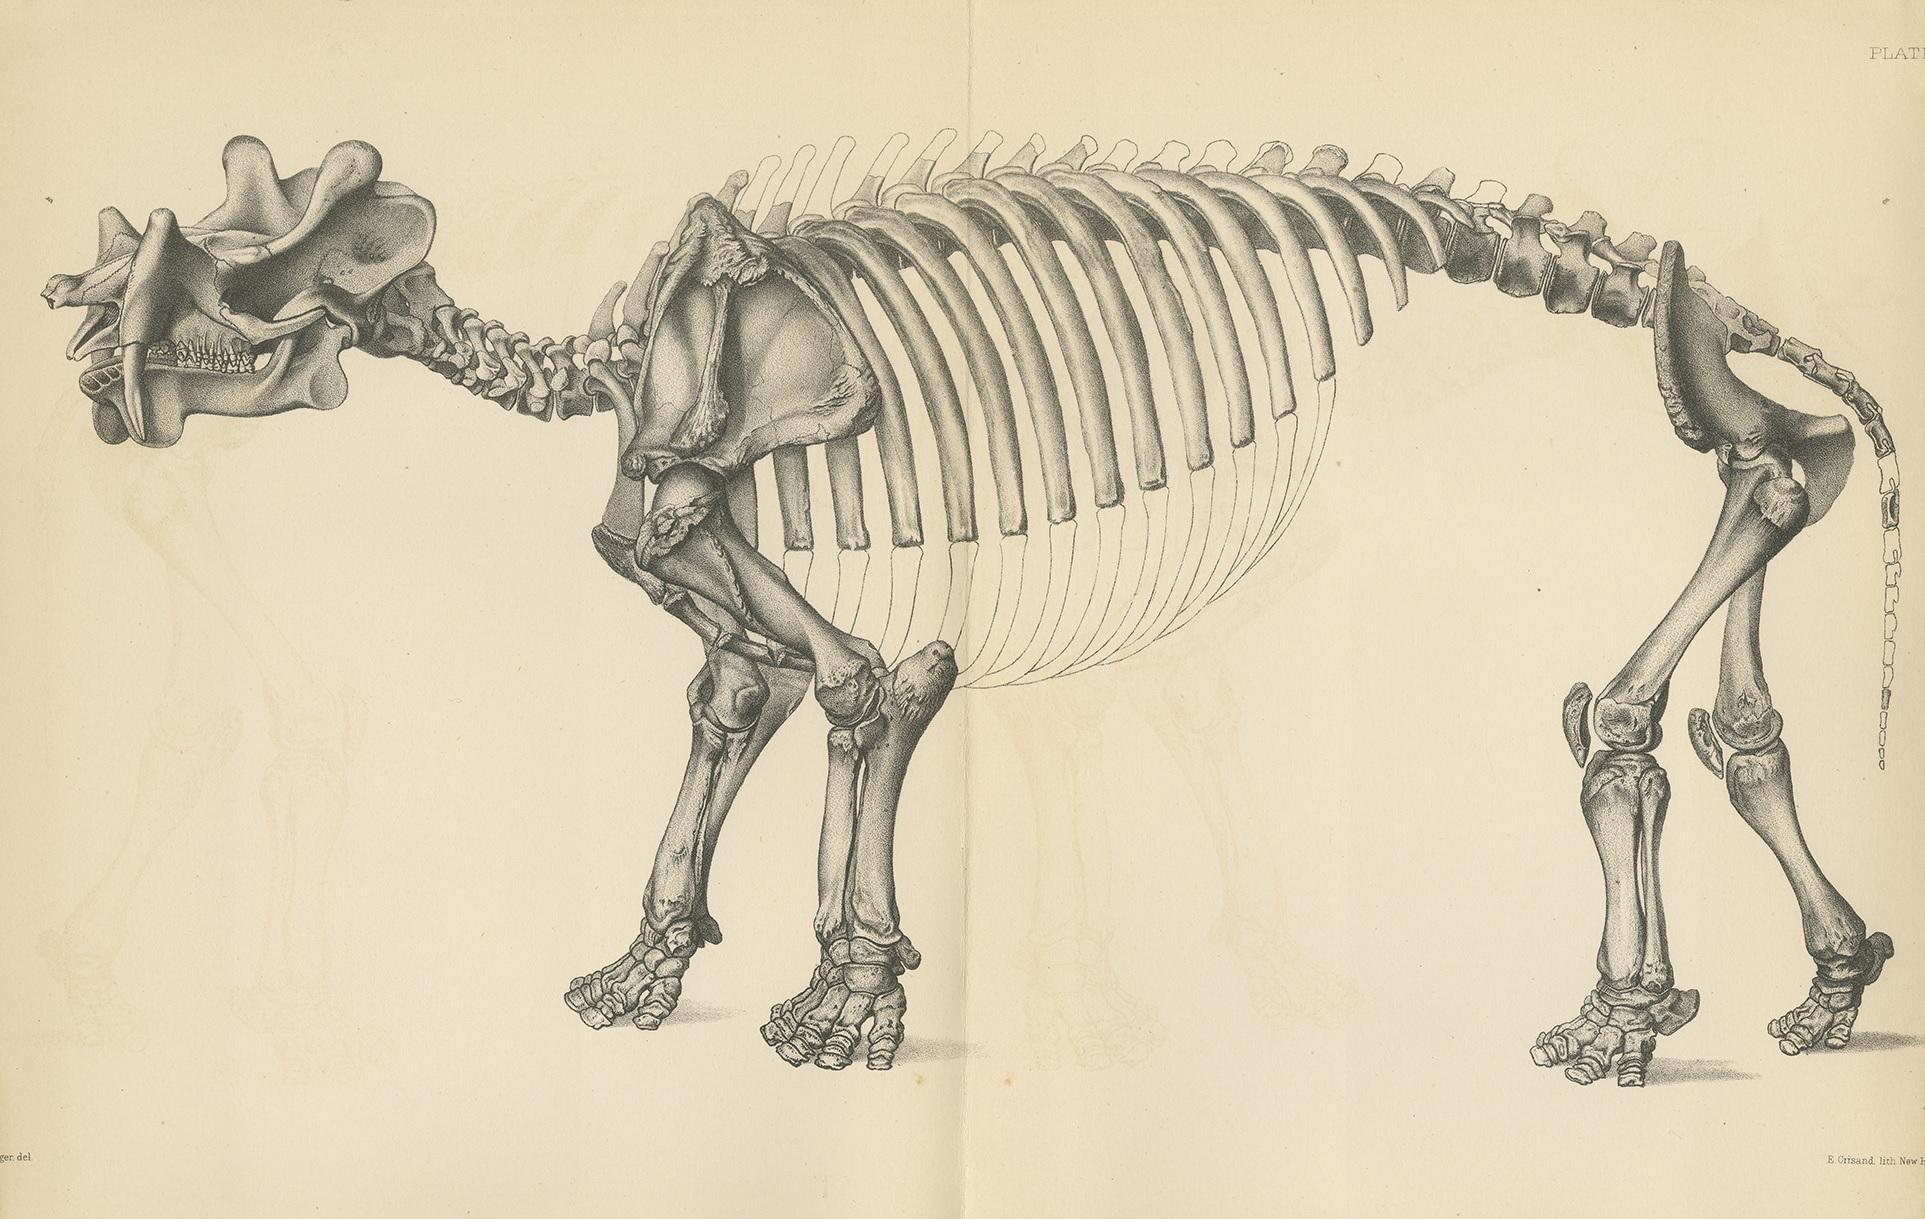 Antique print titled 'Dinoceras Mirabile'. Original lithograph of a Dinoceras Mirabile, an extinct genus of herbivorous mammal. This print originates from volume 10 of 'Monographs of the United States Geological Survey' by Othniel Charles Marsh.